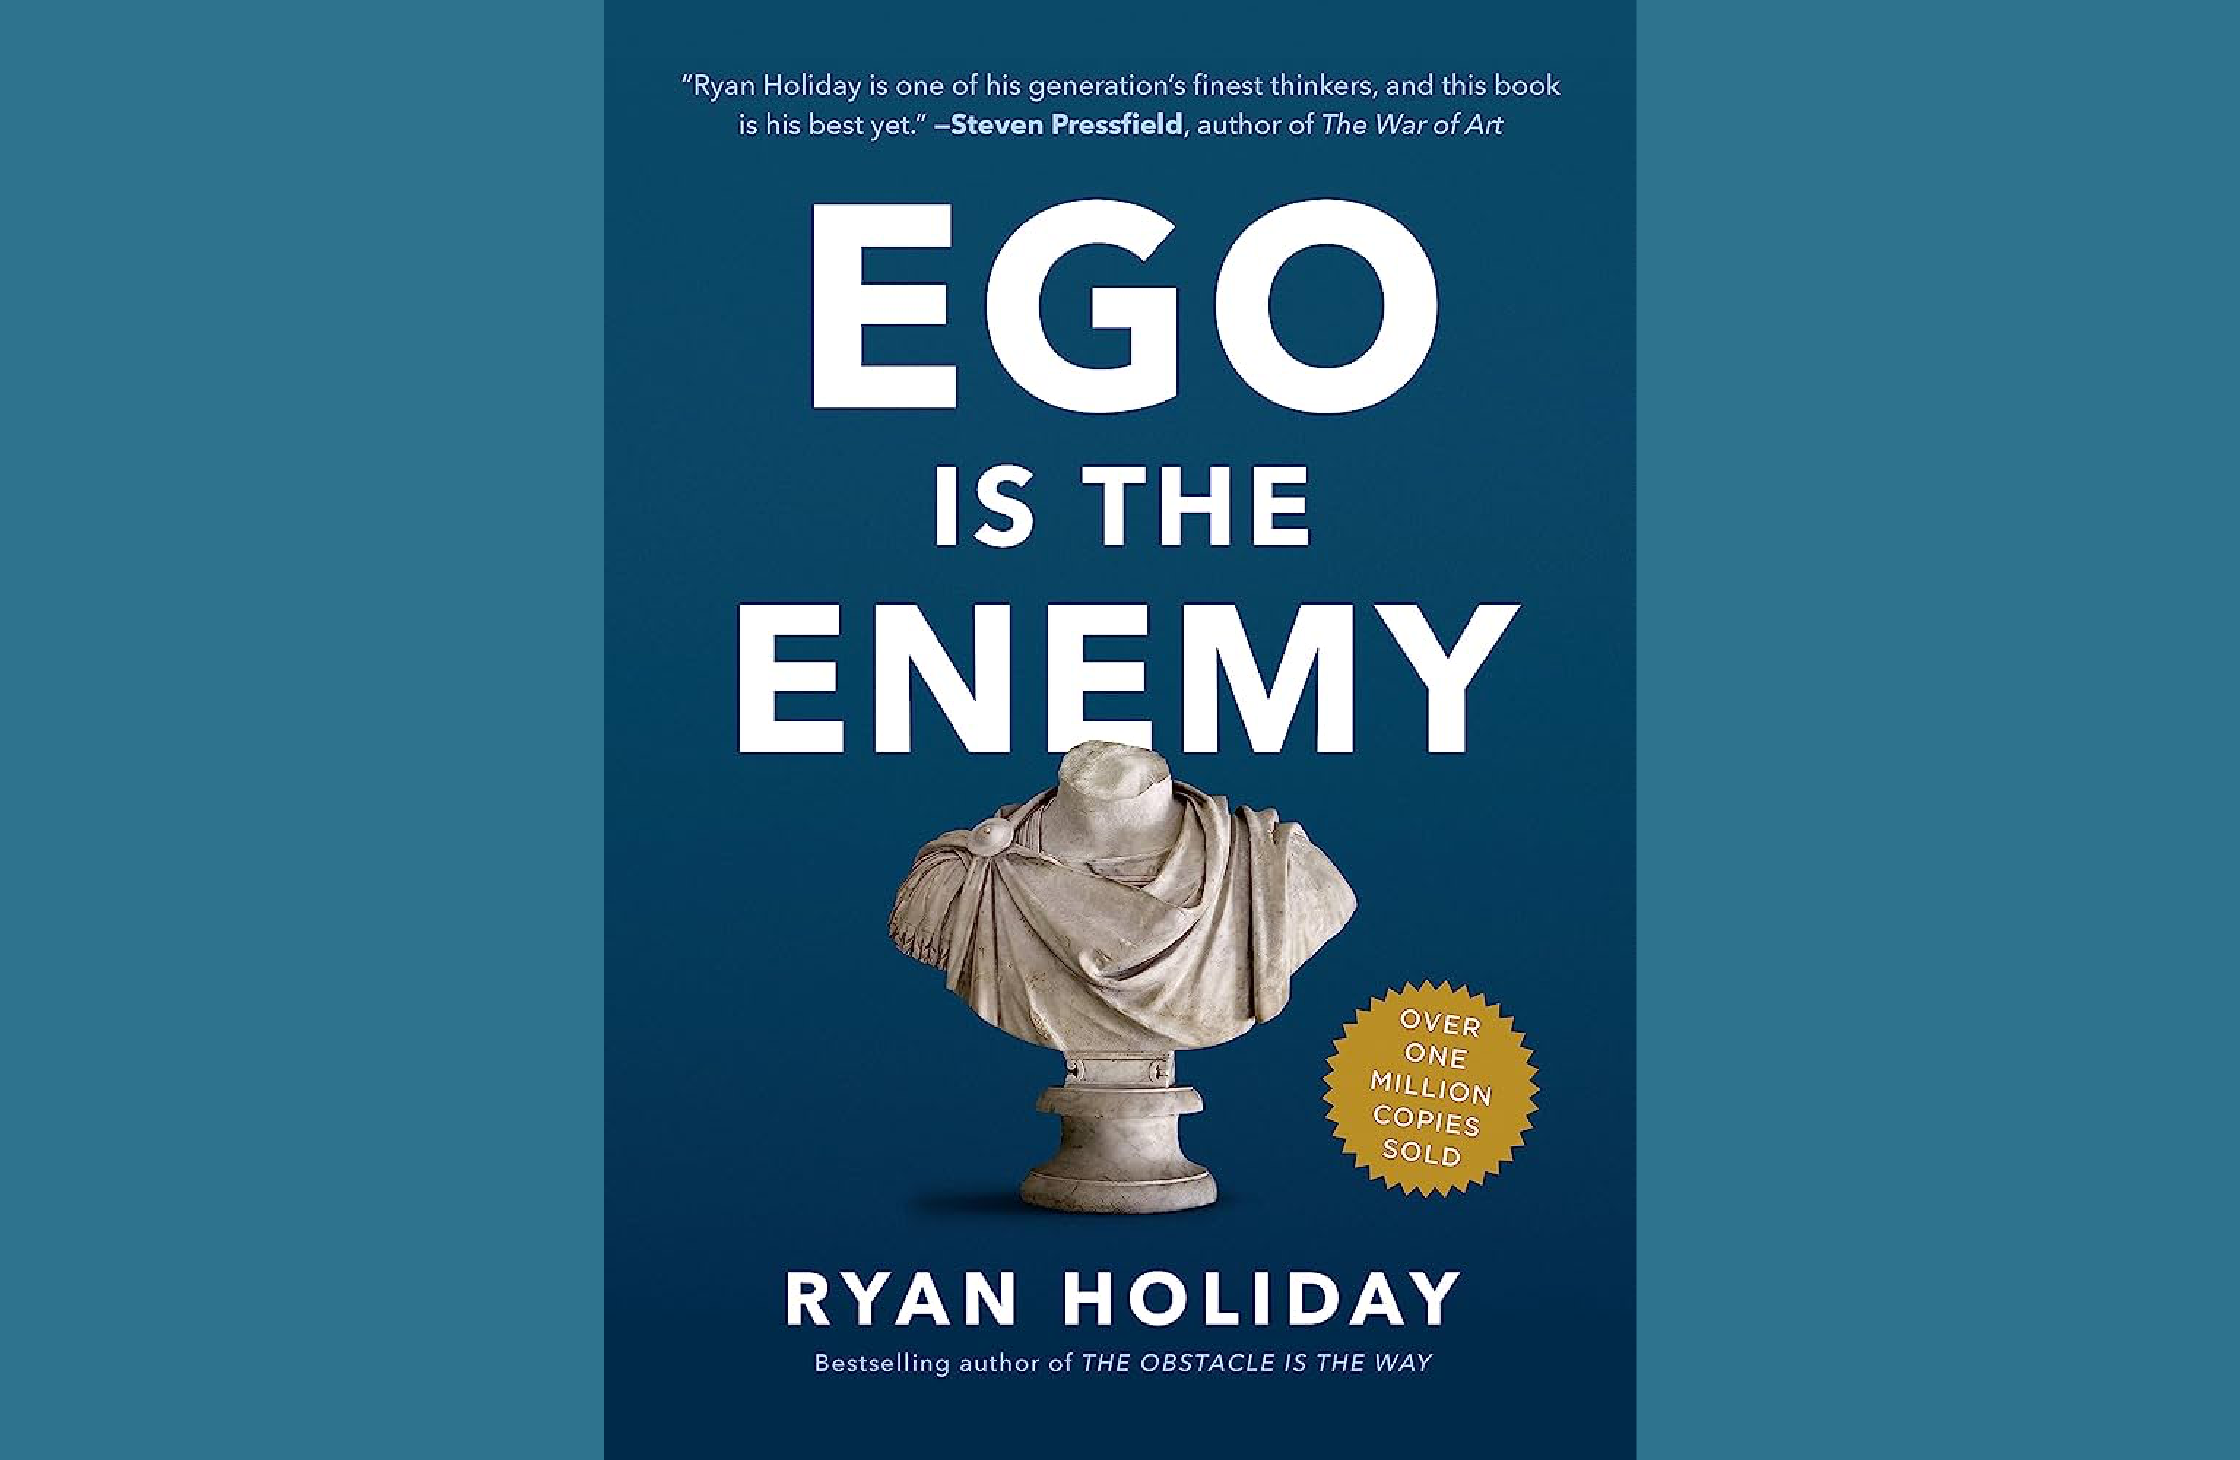 Summary: Ego is the Enemy by Ryan Holiday